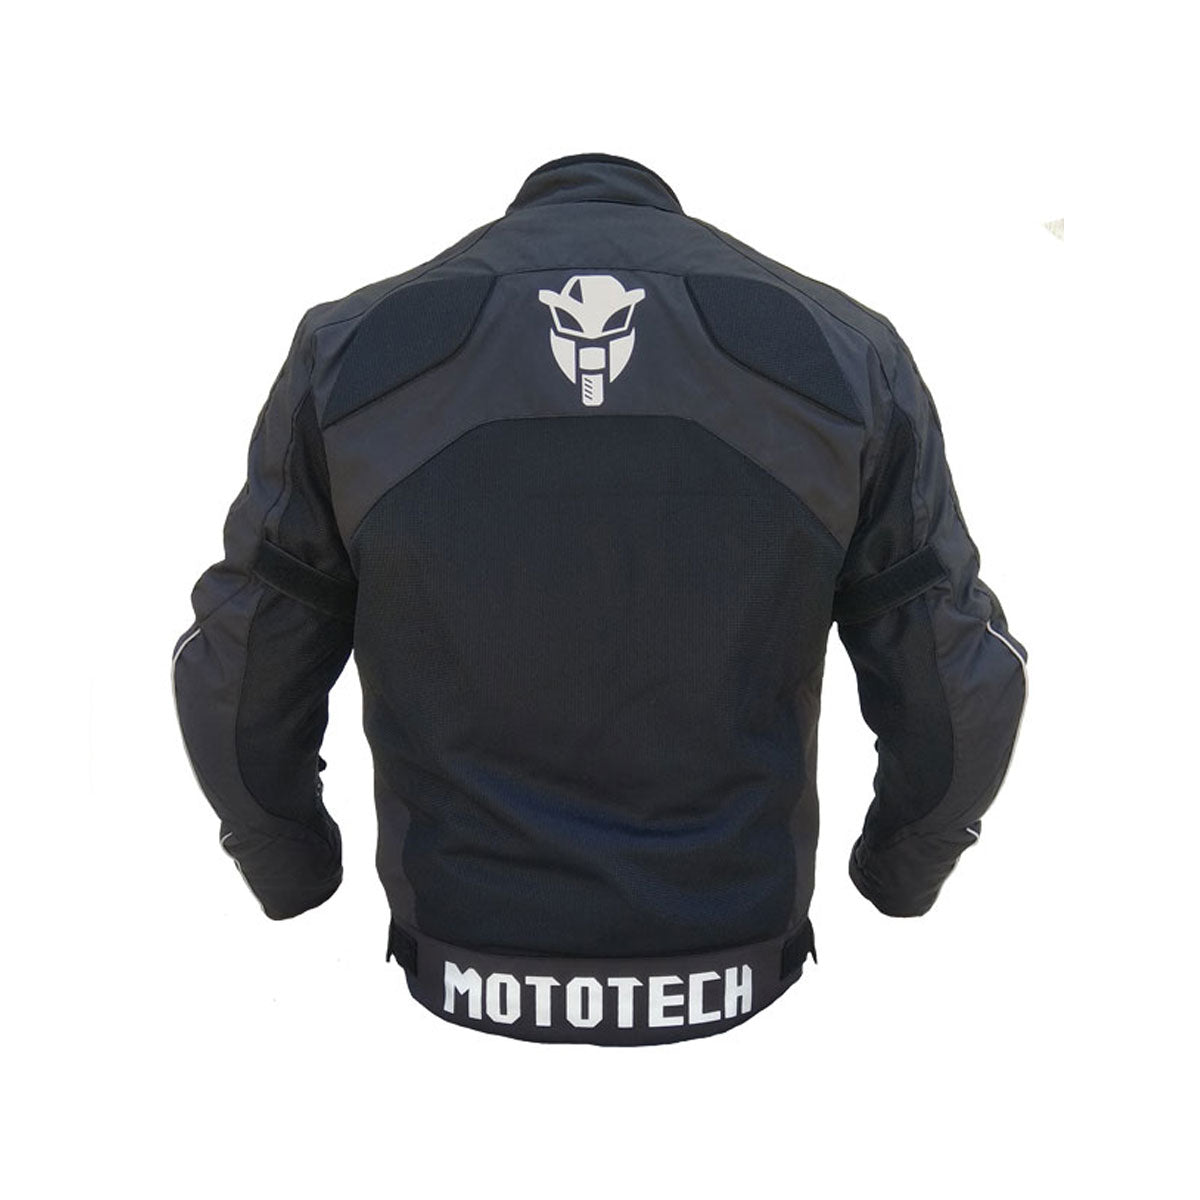 Best Sport Riding Motorcycle Jackets Guide (Updated Reviews!) - Motorcycle  Gear Hub